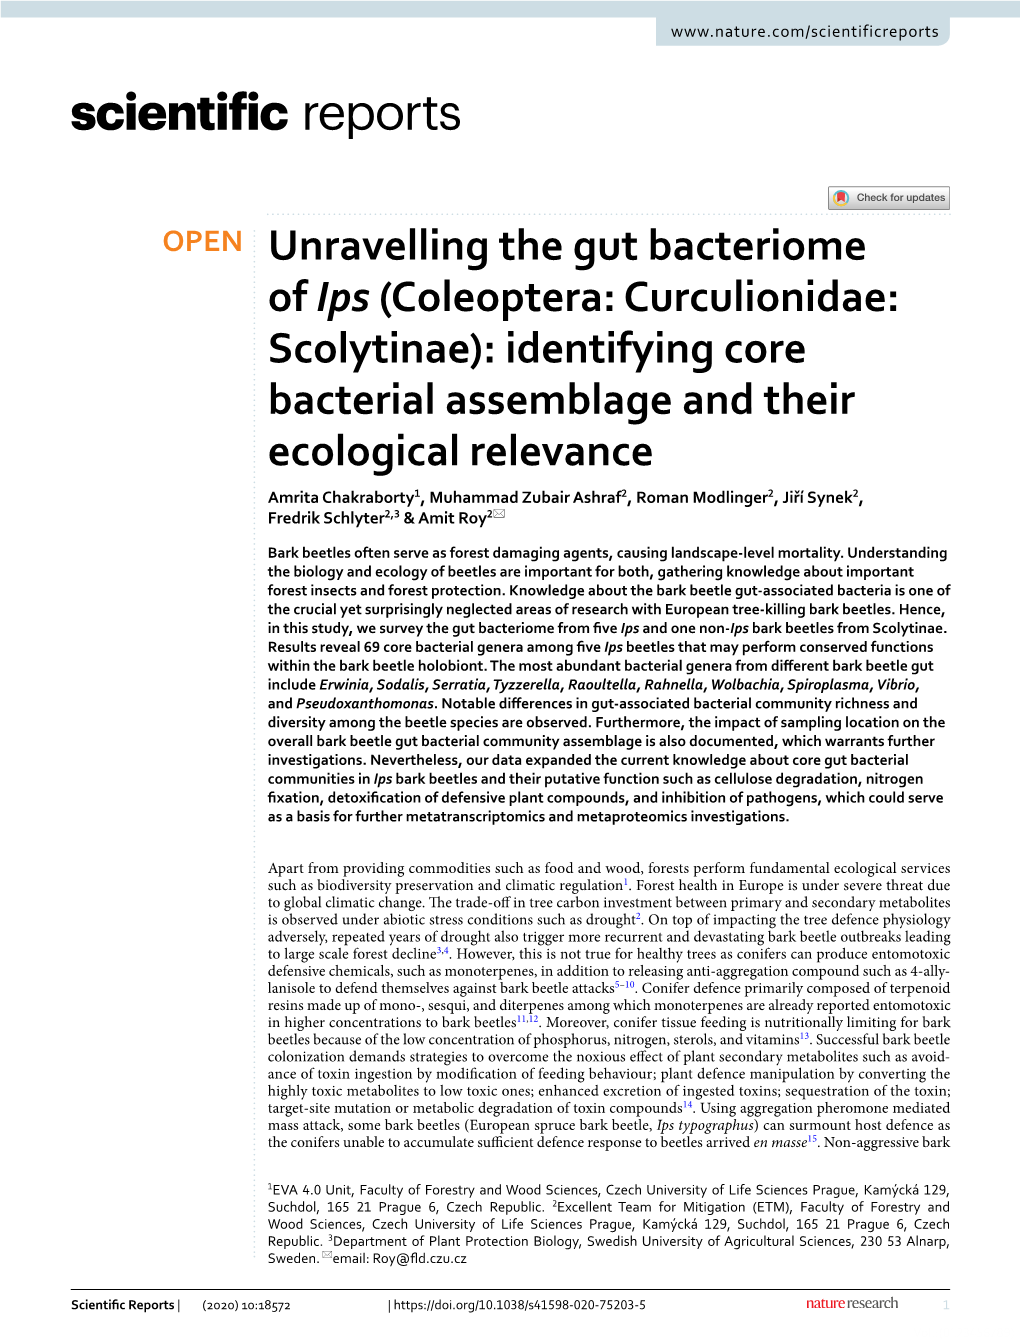 Unravelling the Gut Bacteriome of Ips (Coleoptera: Curculionidae